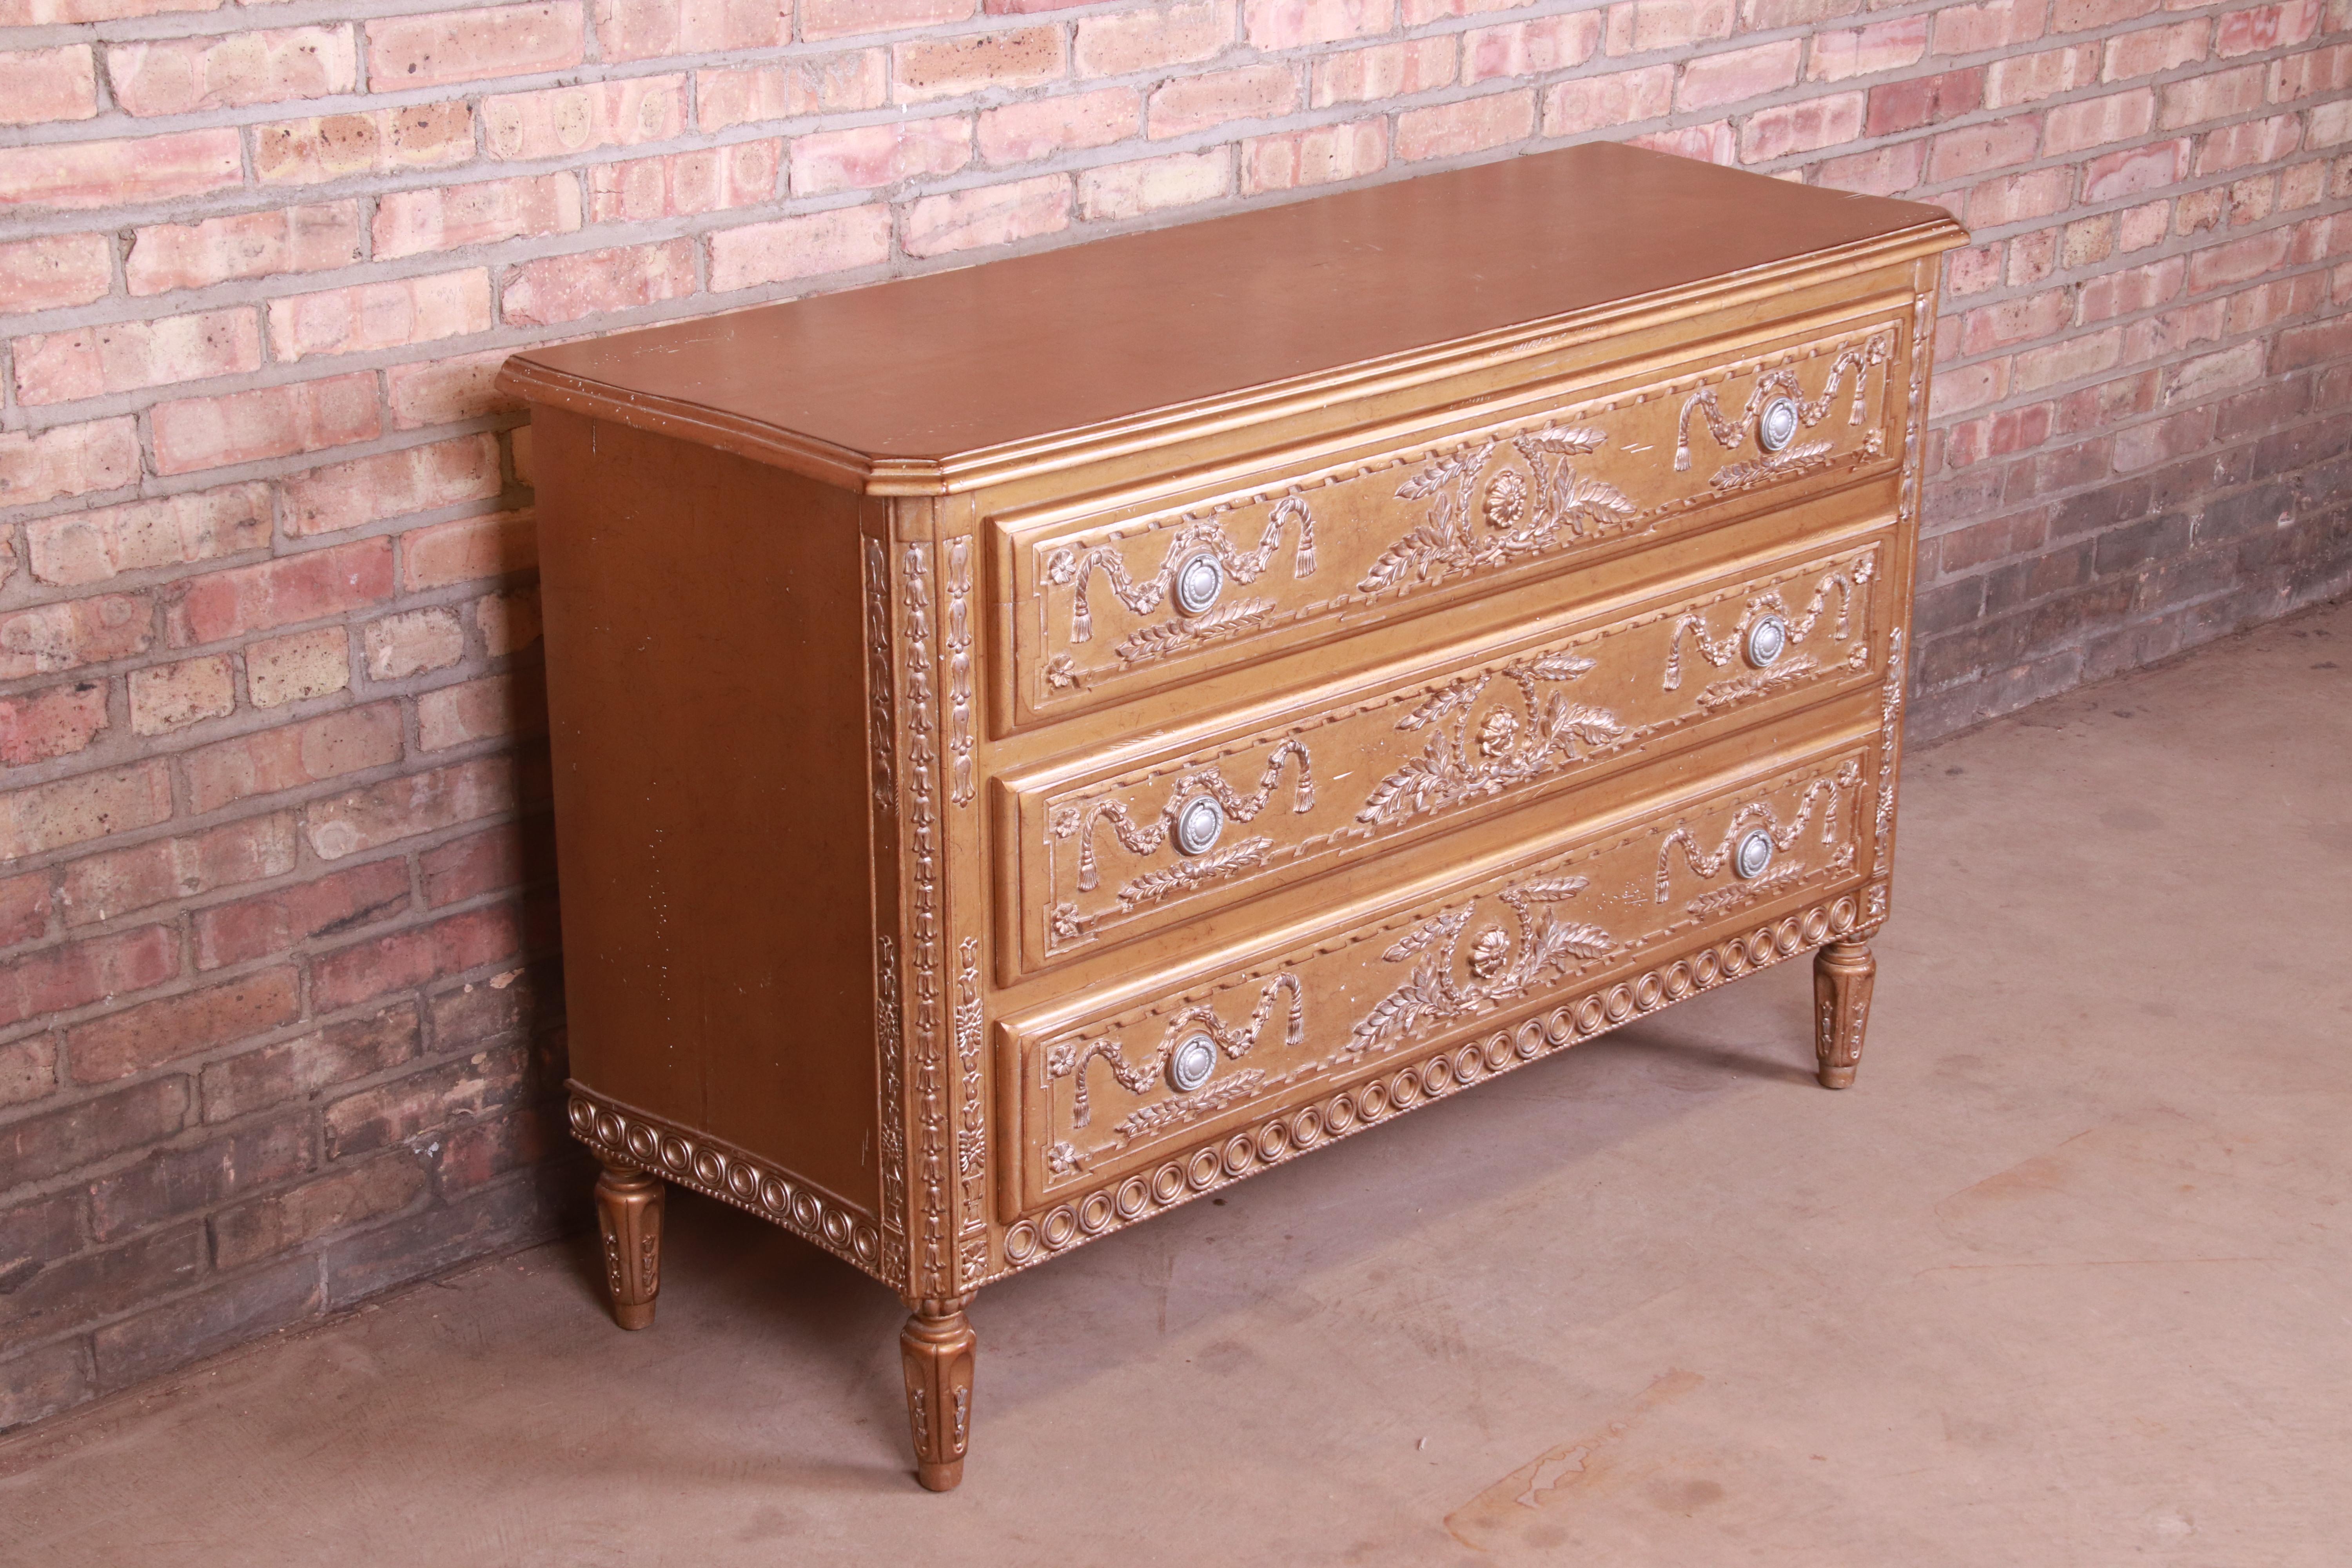 Giltwood French Regency Louis XVI Gold Gilt Three-Drawer Dresser or Commode For Sale